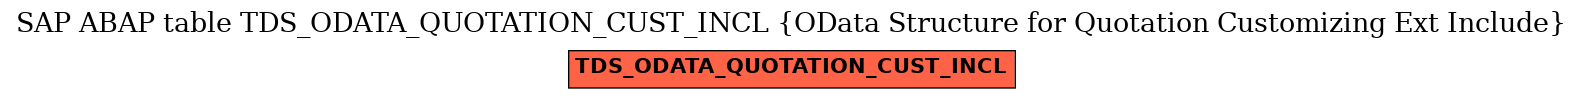 E-R Diagram for table TDS_ODATA_QUOTATION_CUST_INCL (OData Structure for Quotation Customizing Ext Include)